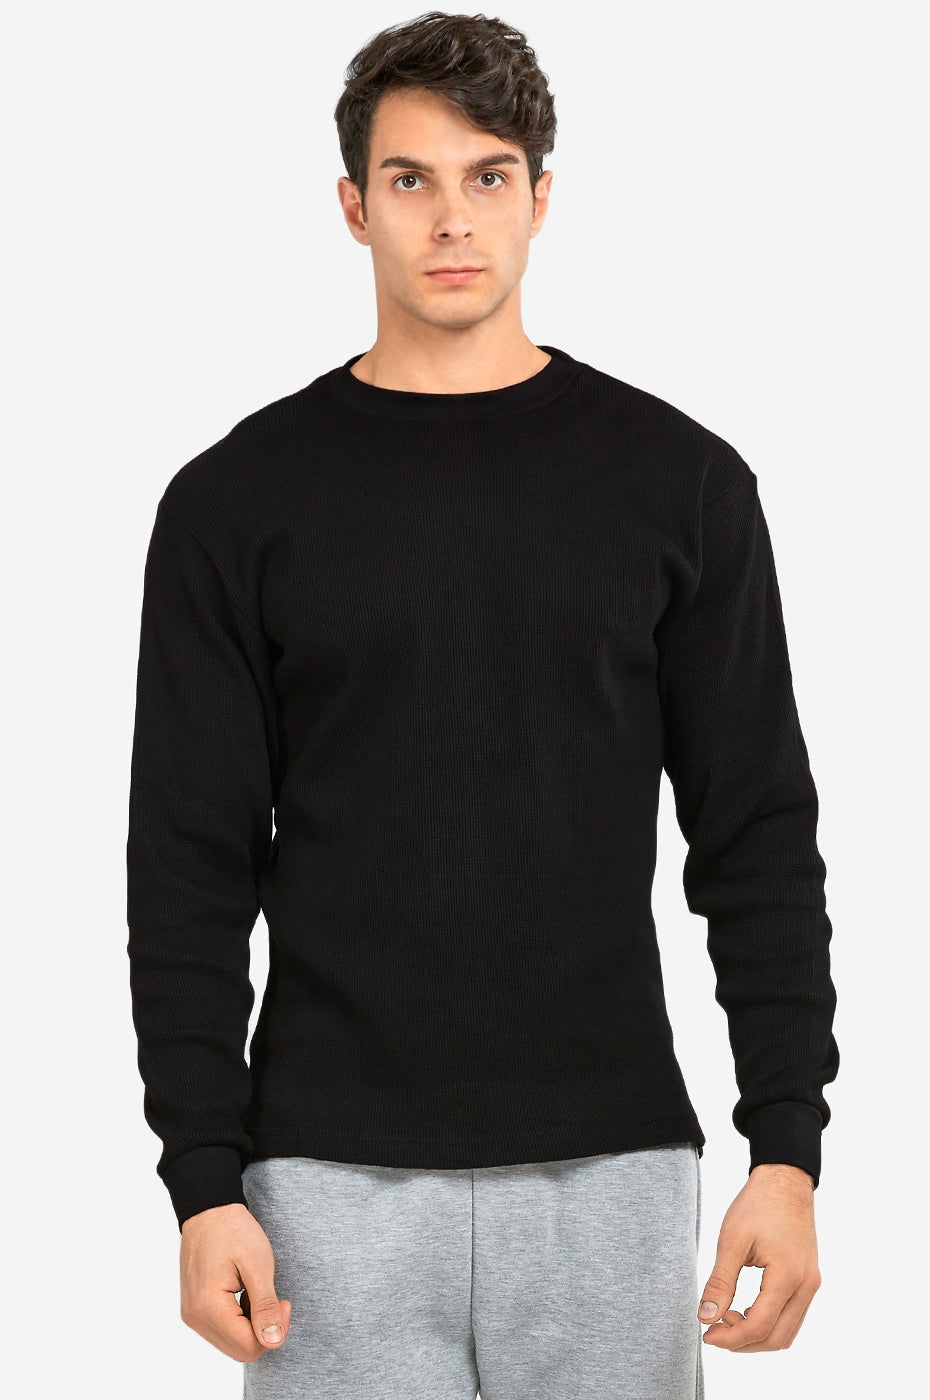 Men's Essentials Knocker Classic Breathable Cotton Waffle Knit Texture Thermal Top (KHT001_BLK)